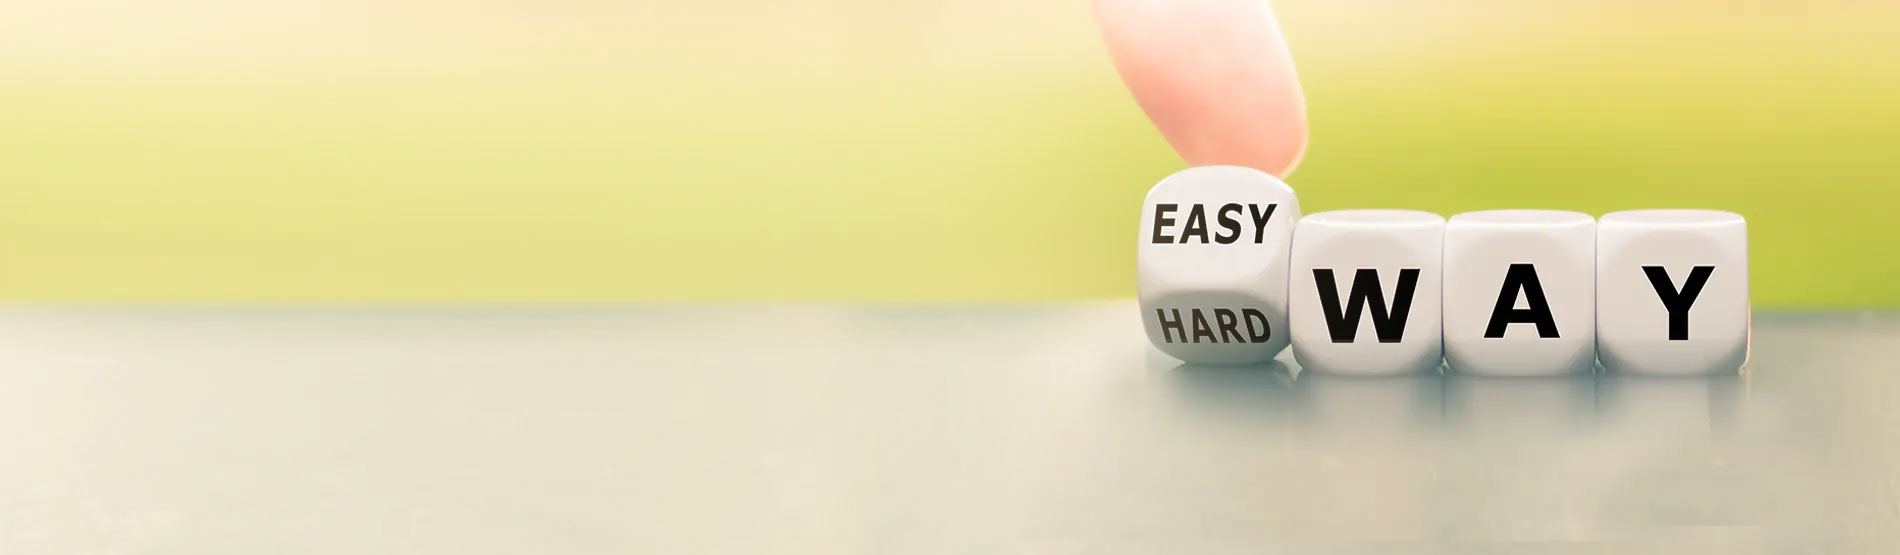 Hand turns a dice and changes the expression "hard way" to "easy way".